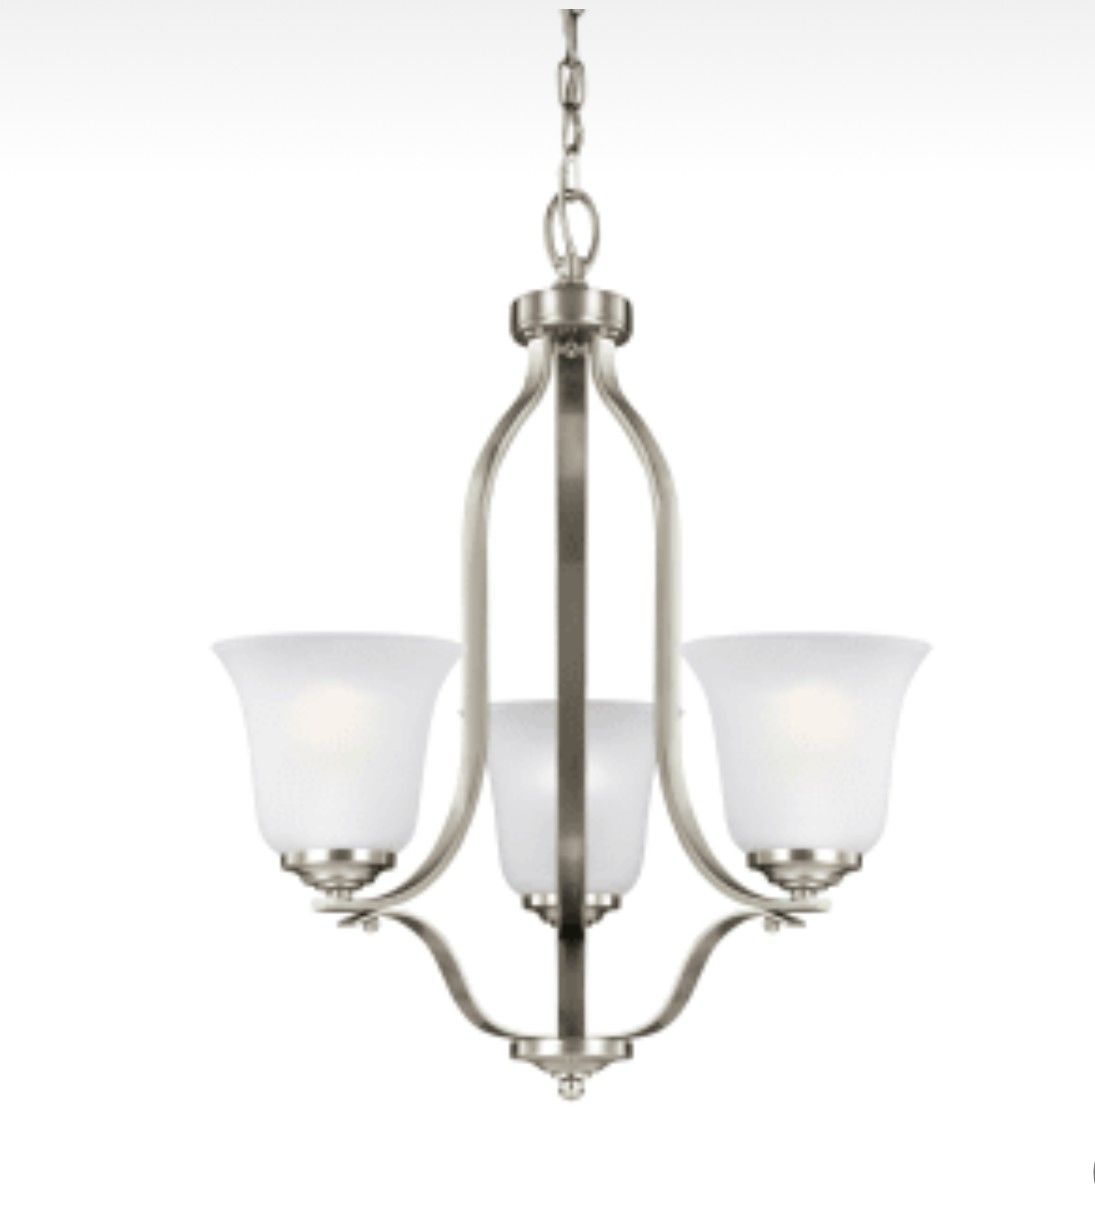 New Chandelier by Sea Gull Lighting with long chain Original $181